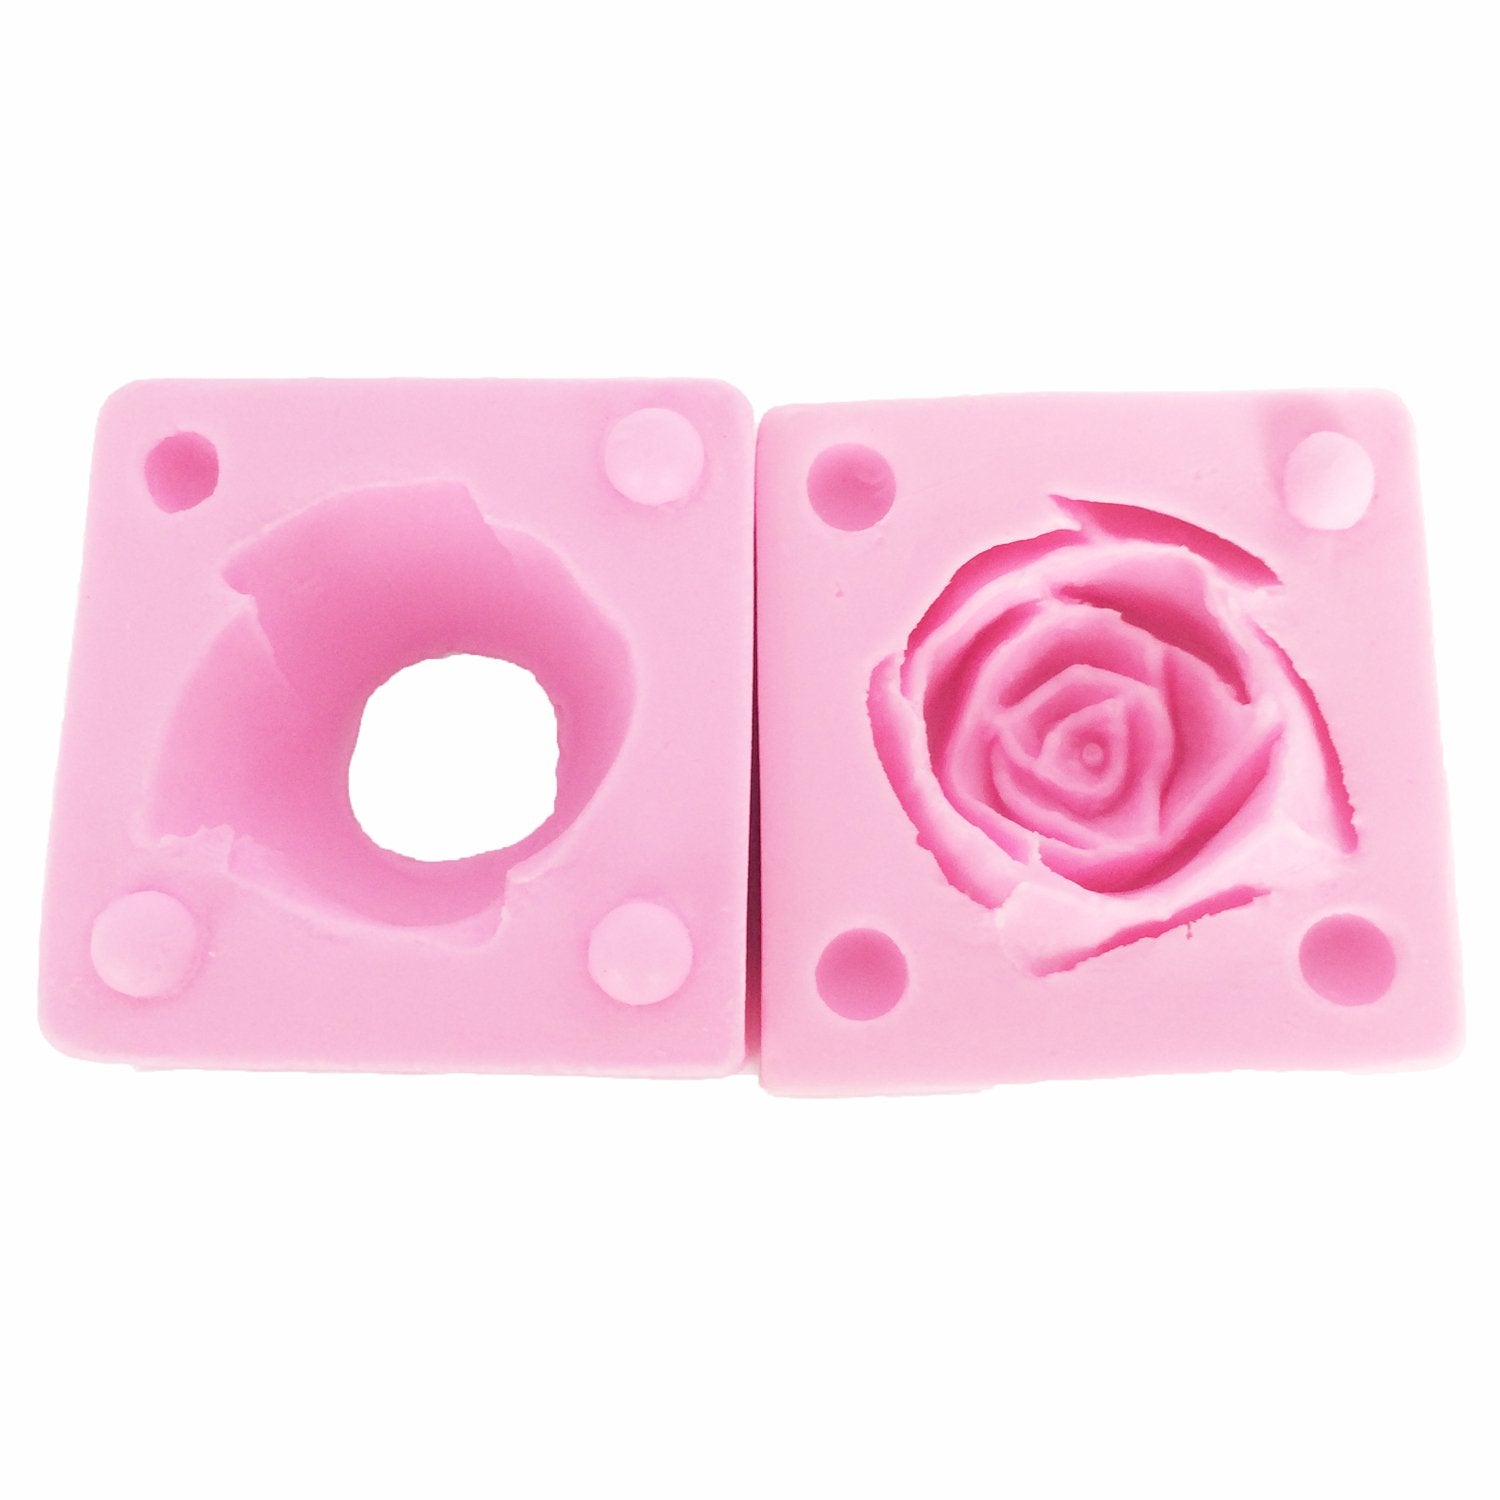 Funshowcase Rose and Flowers Silicone Mold